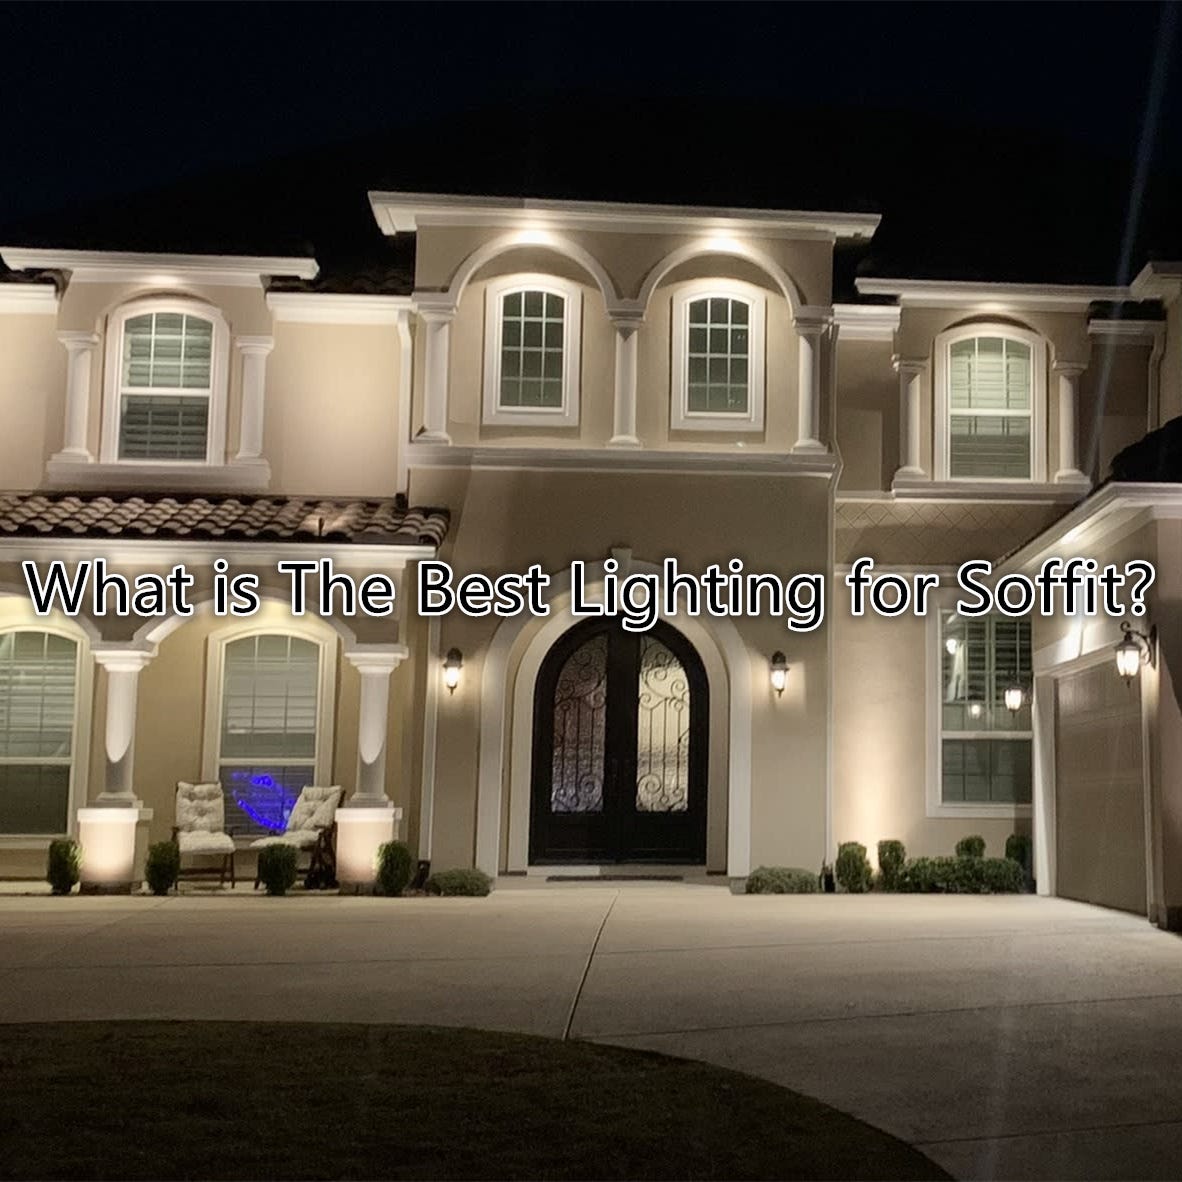 Exterior Soffit Lighting Ideas. Soffit decoration is a great way to add… |  by Eneradar | Medium